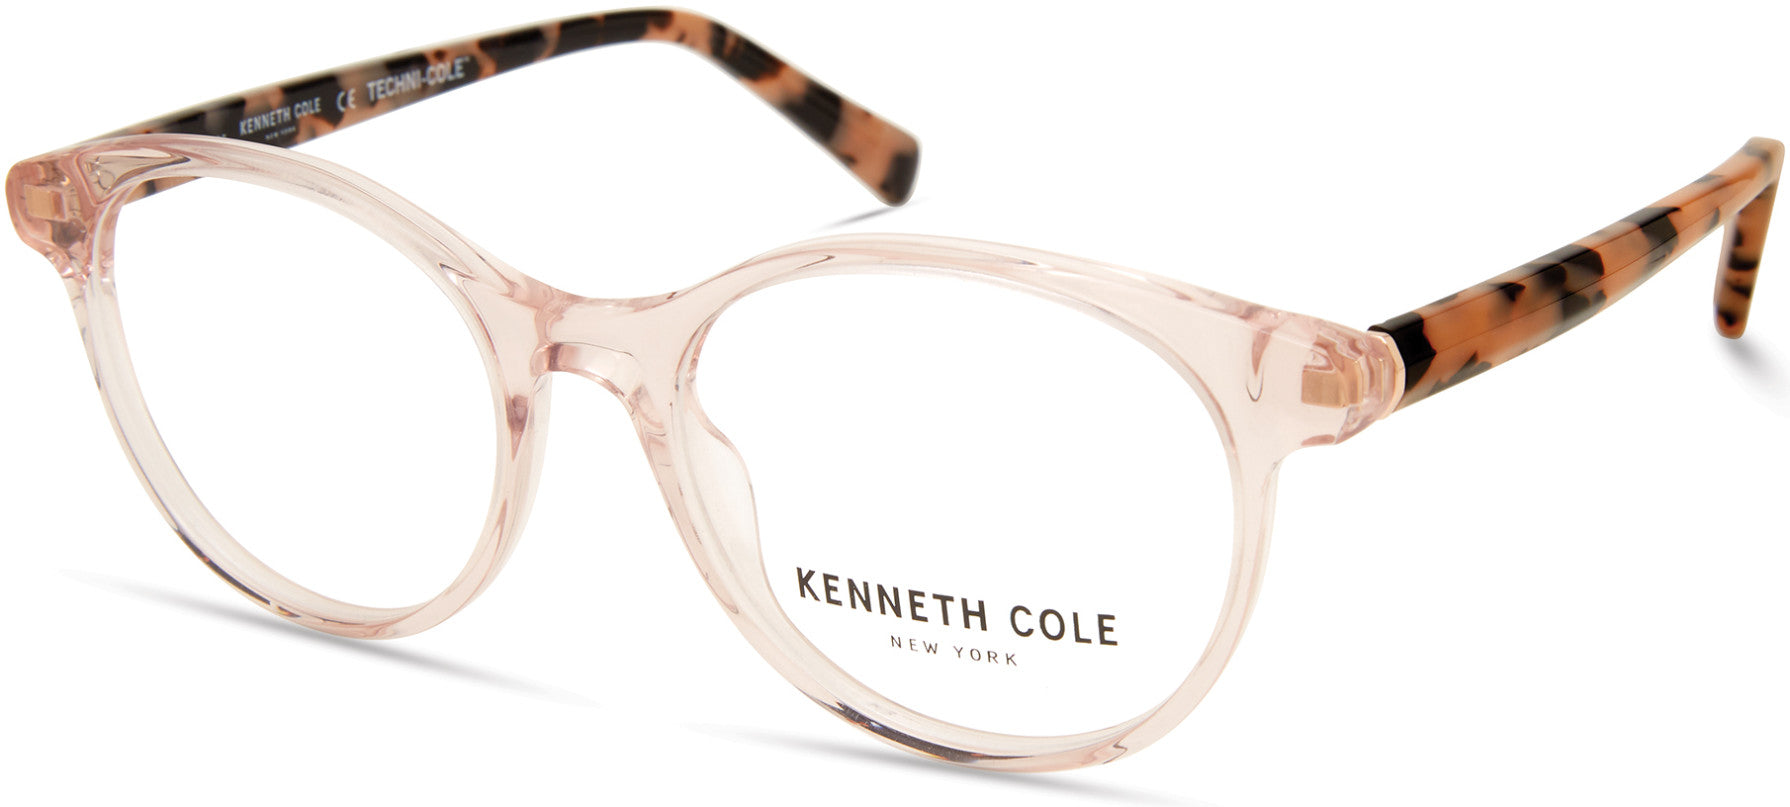 Kenneth Cole New York,Kenneth Cole Reaction KC0325 Round Eyeglasses 072-072 - Shiny Pink